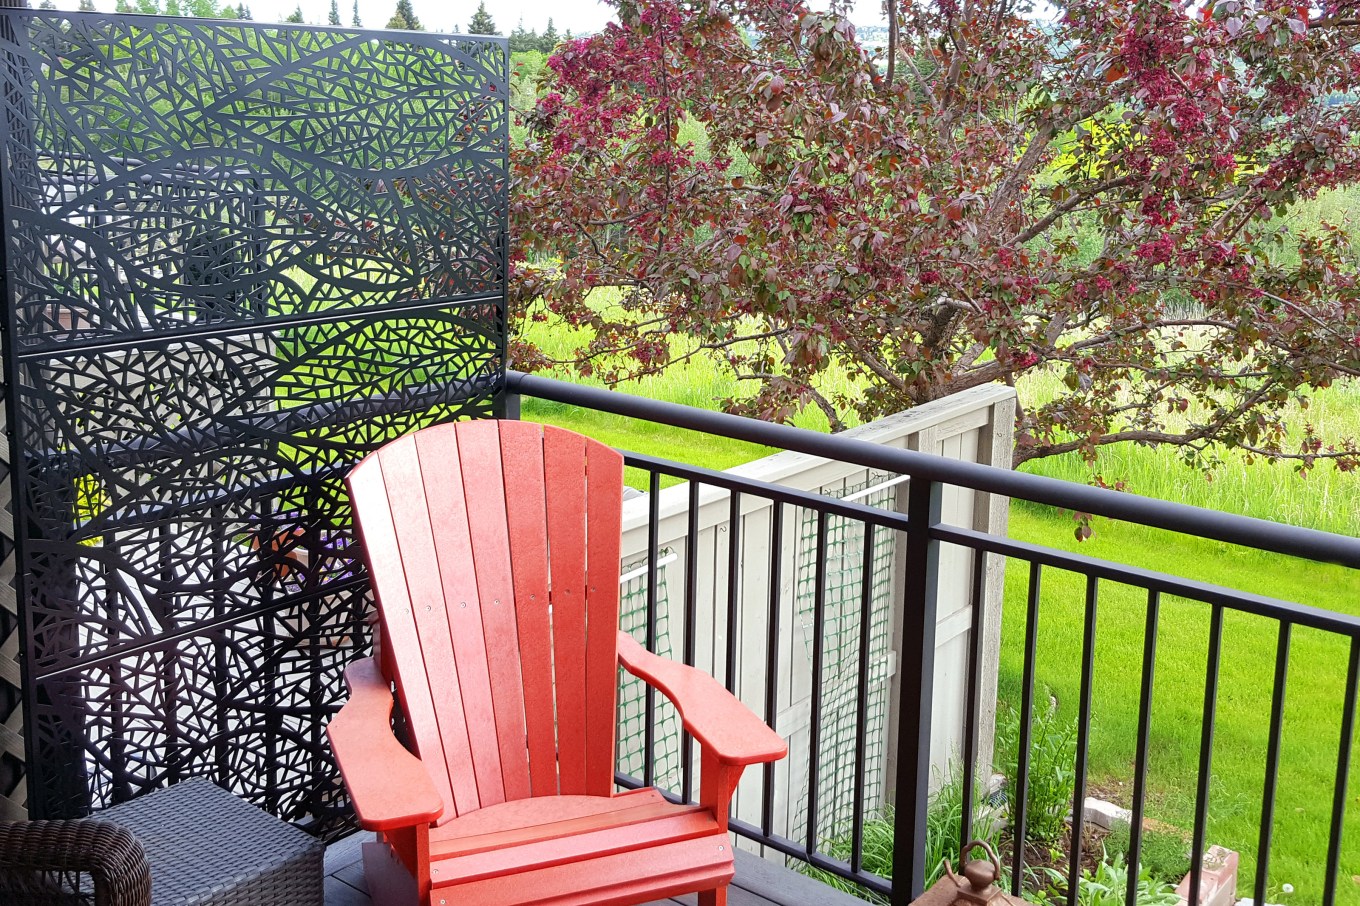 Partial residential deck with black free standing decorative privacy screen that hides the next door neighbor's area that is in close contact. Black iron railing.